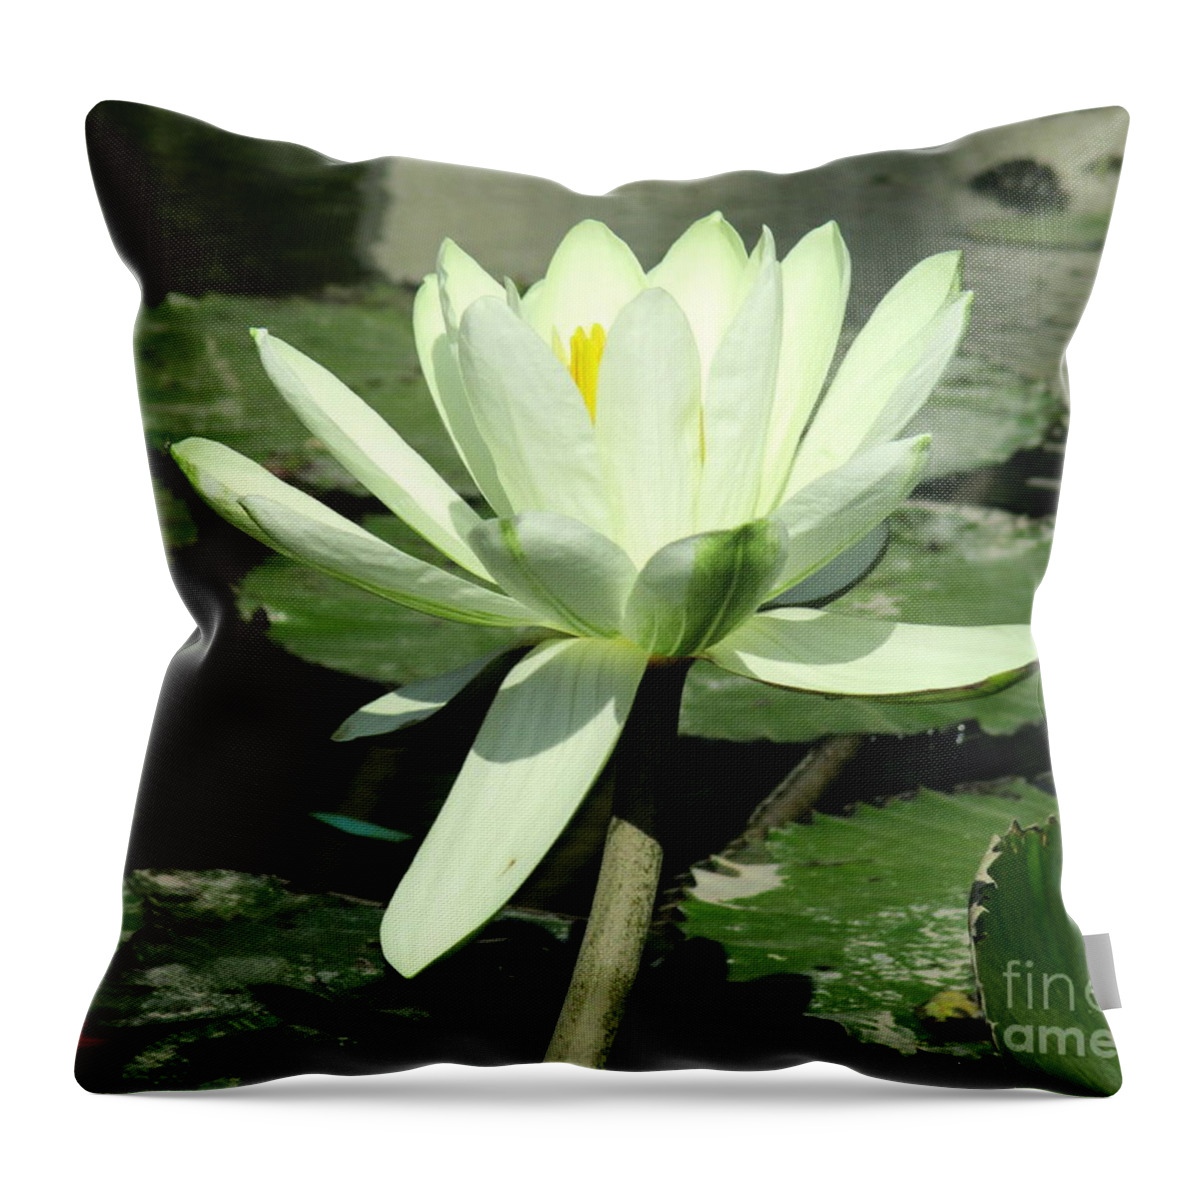 White Water Lilly Throw Pillow featuring the photograph White Water Lily 1 by Randall Weidner